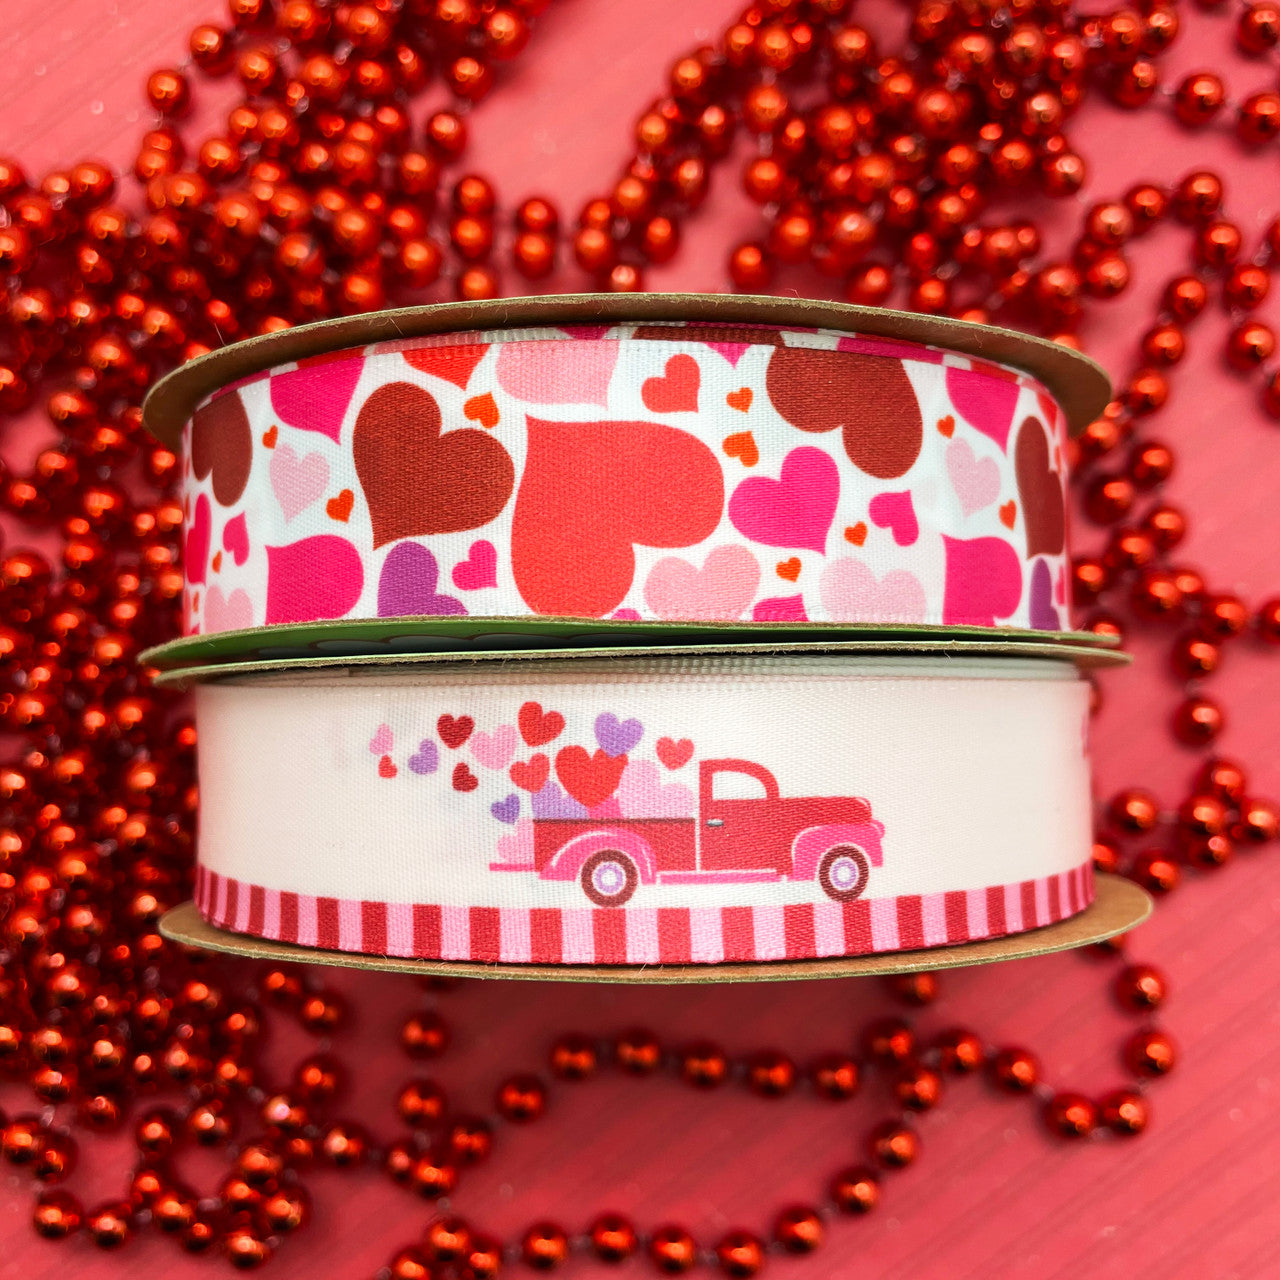 Our Valentine truck ribbon pairs perfectly with tossed hearts! Make a gift extra pretty by combining these two ribbons on the package! The recipient will love it!